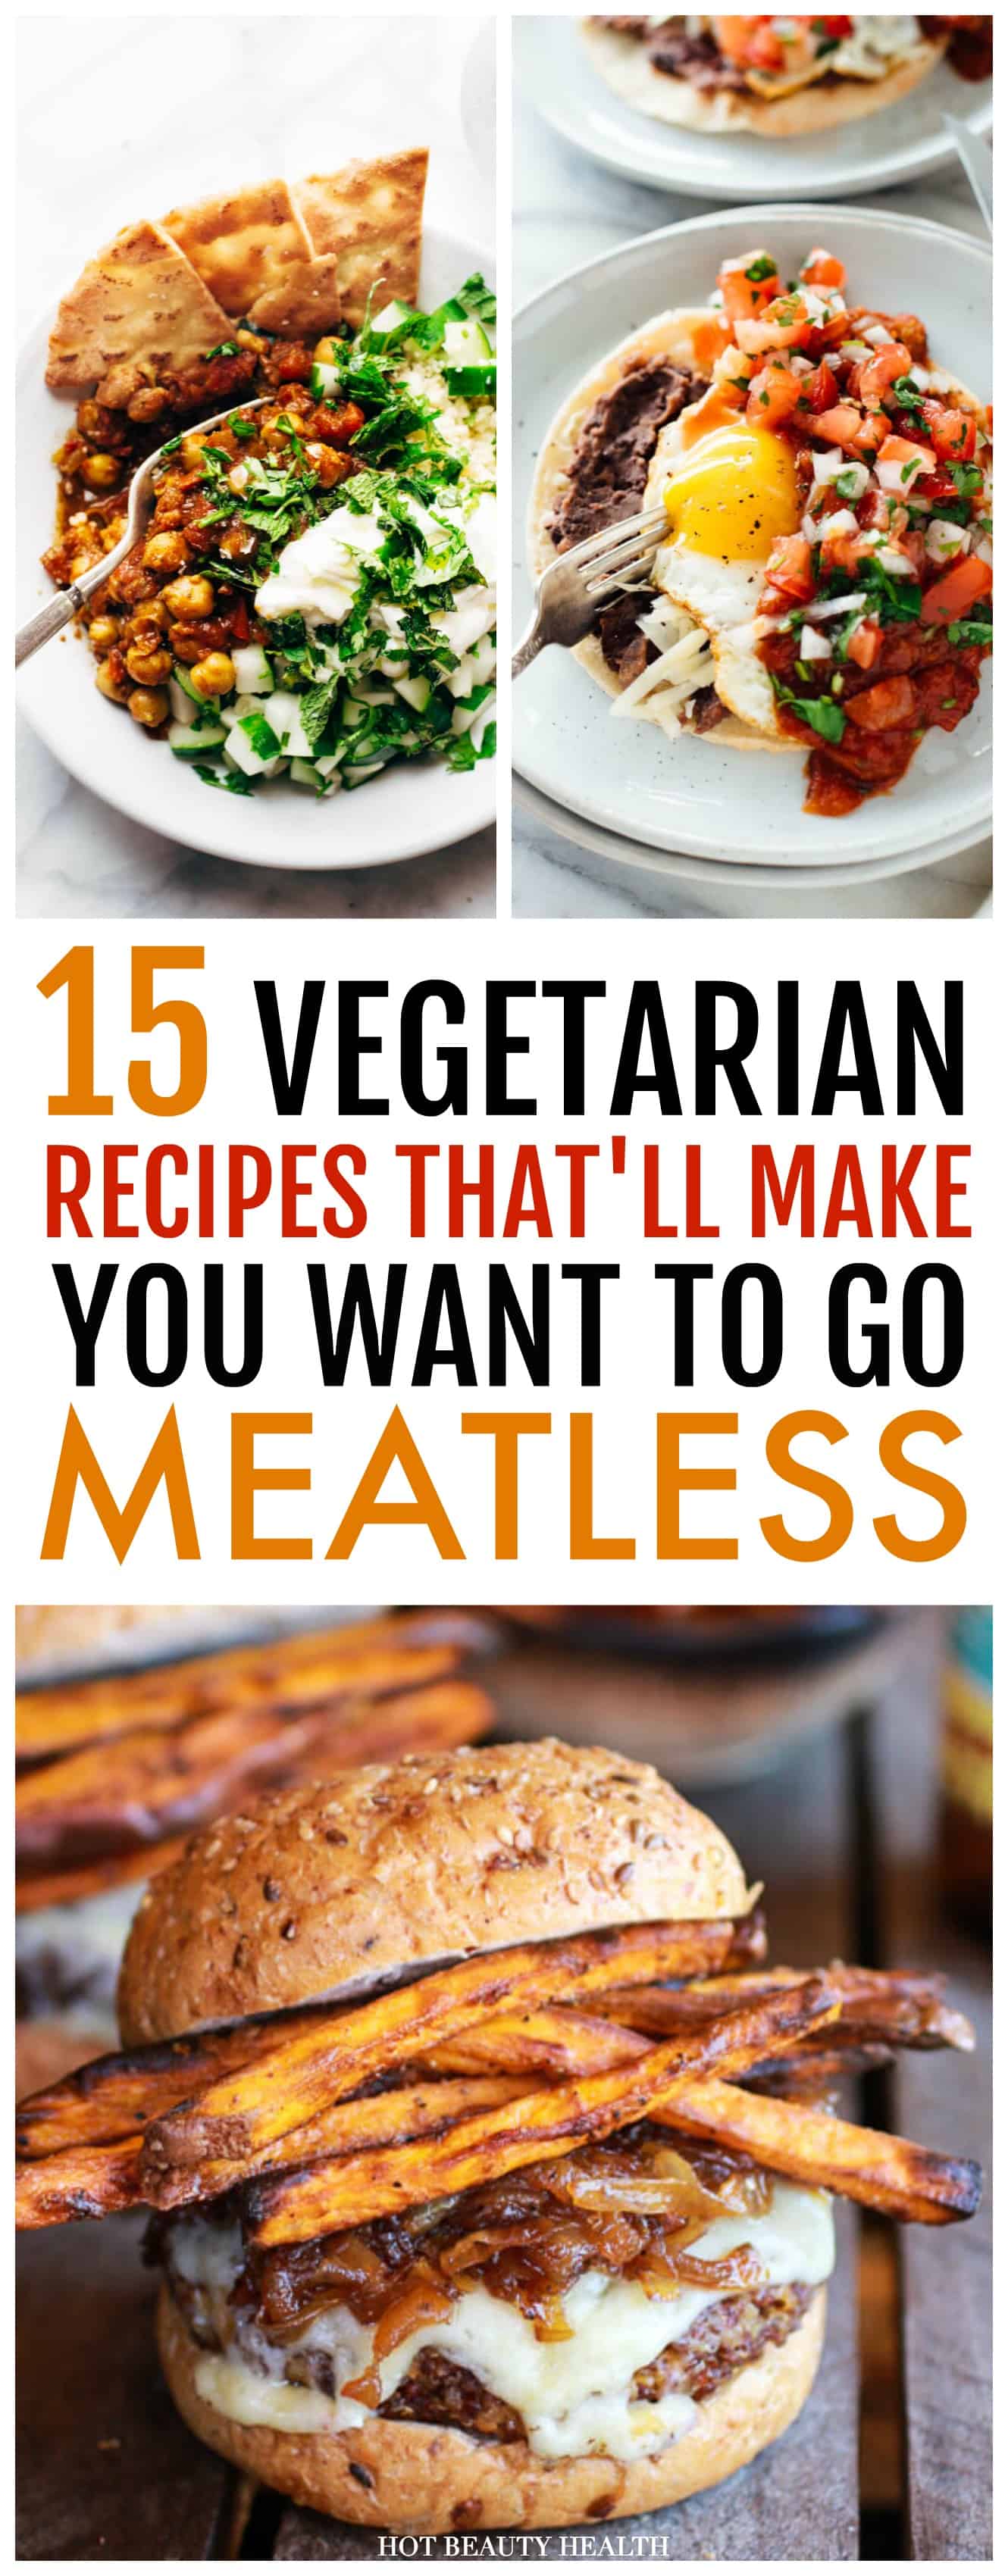 These 15 Vegetarian Recipes Are So Satisfying You’ll Want to Go Meatless for an Entire Month! Now I have some healthy veggie recipes to try for breakfast, lunch, and dinner!